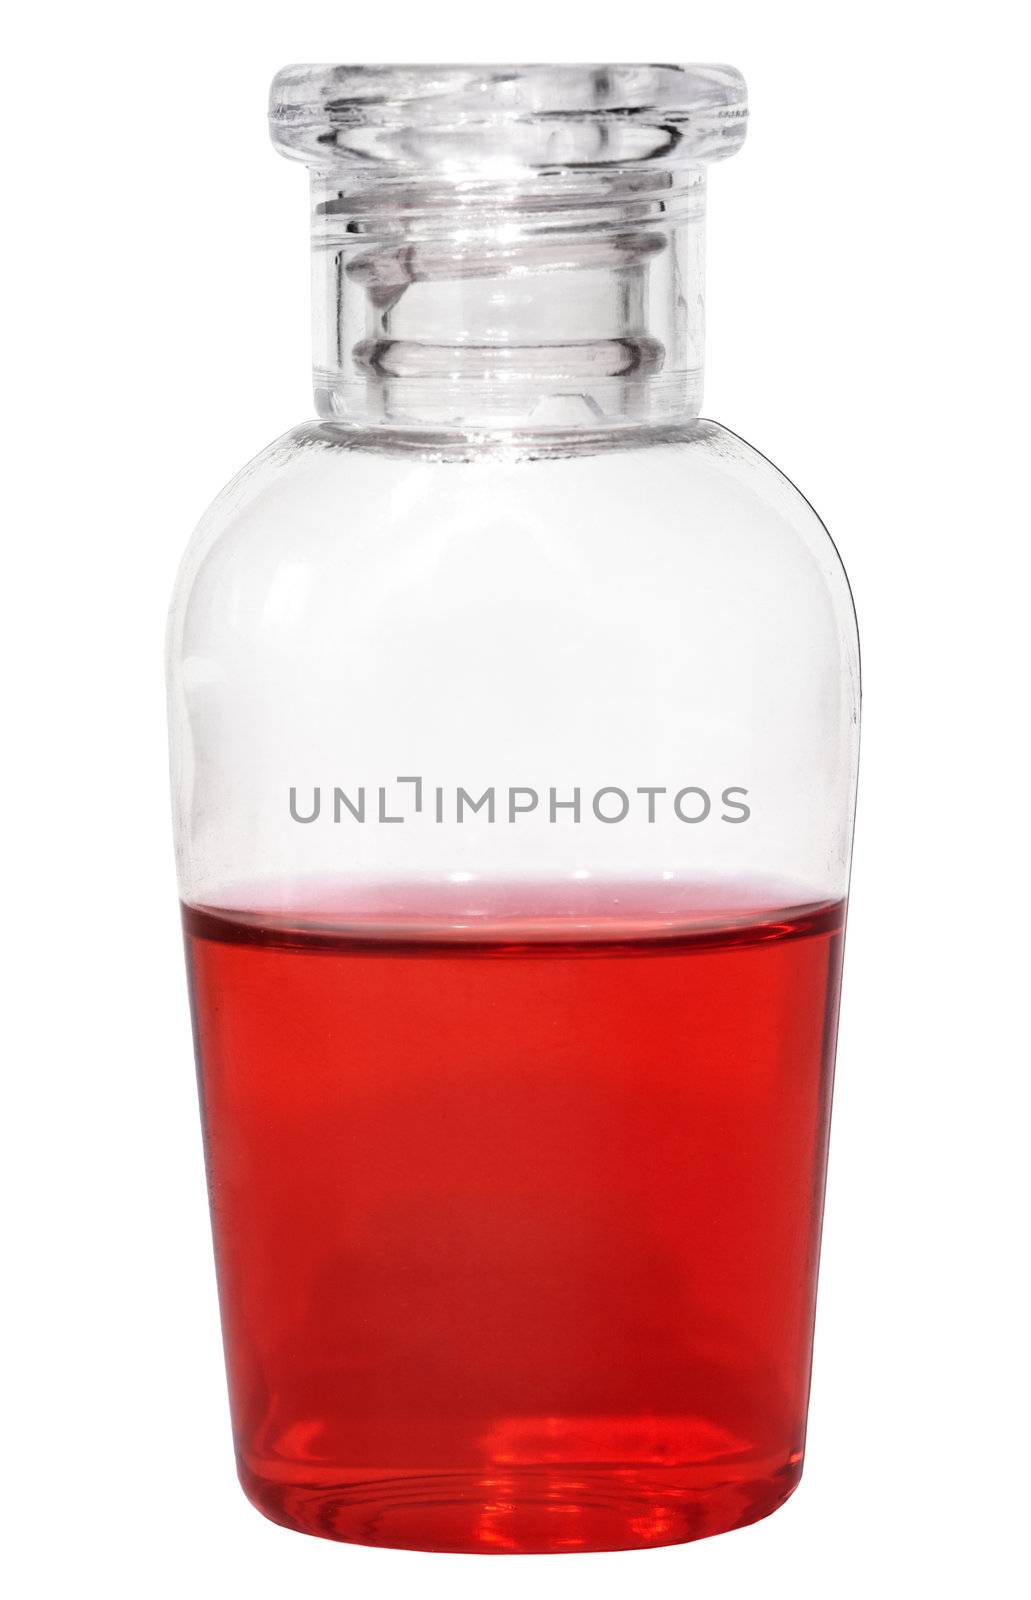 Small vial with red liquid on white background by pzaxe